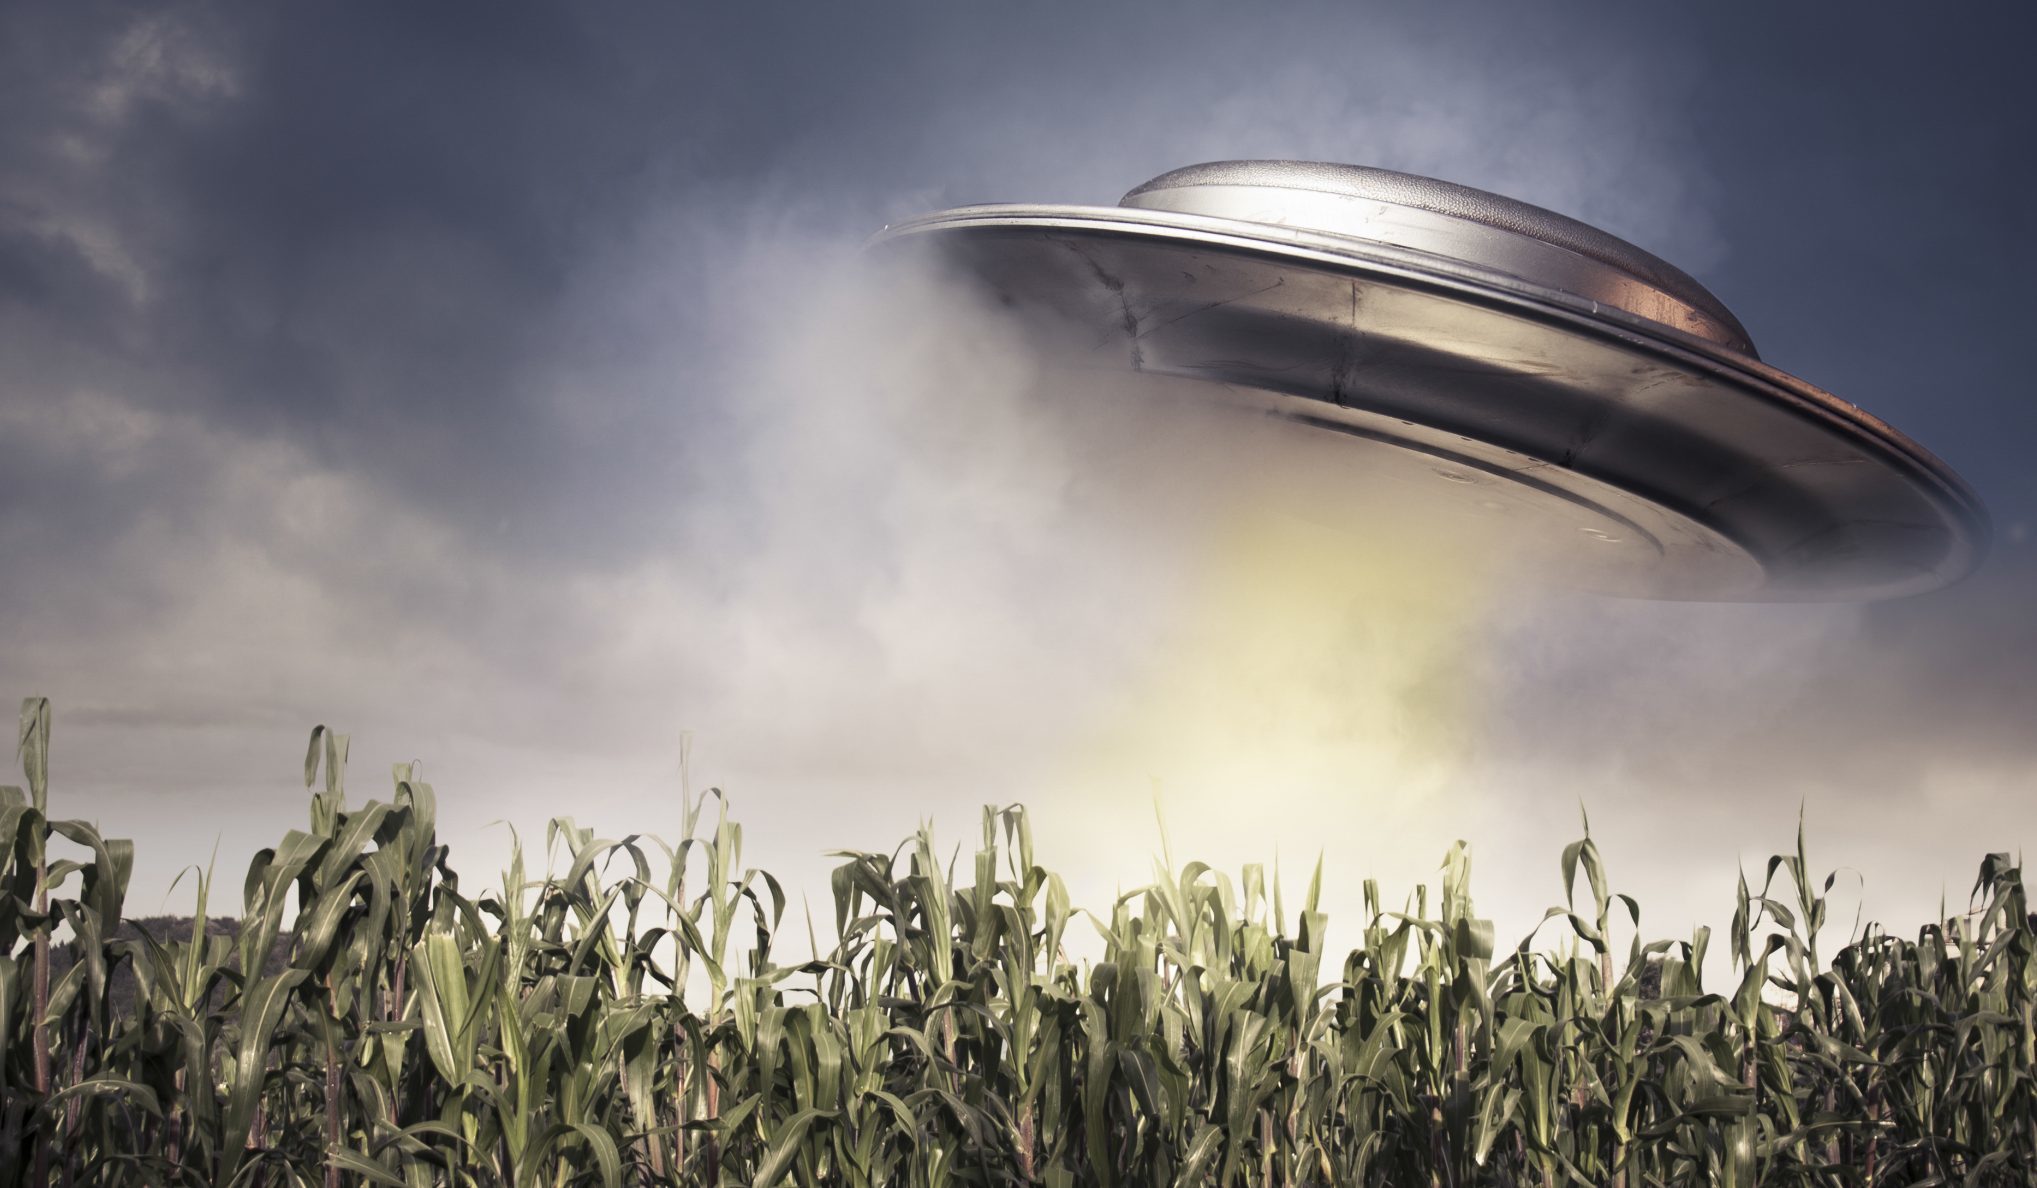 UFO hovering over a crop field